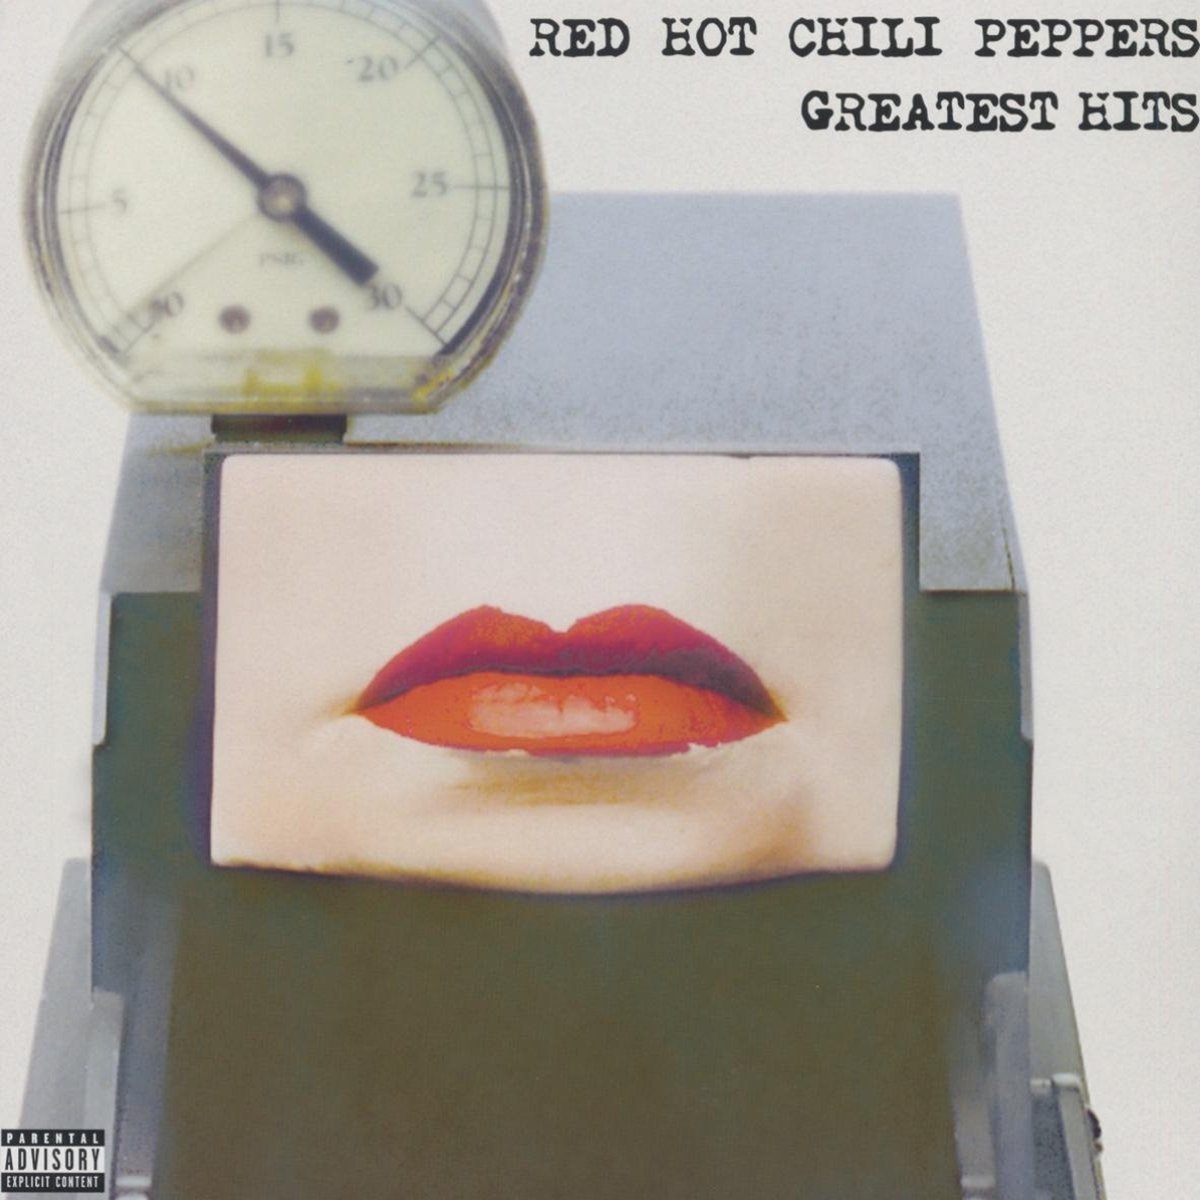 Red Hot Chili Peppers "Greatest Hits" CD